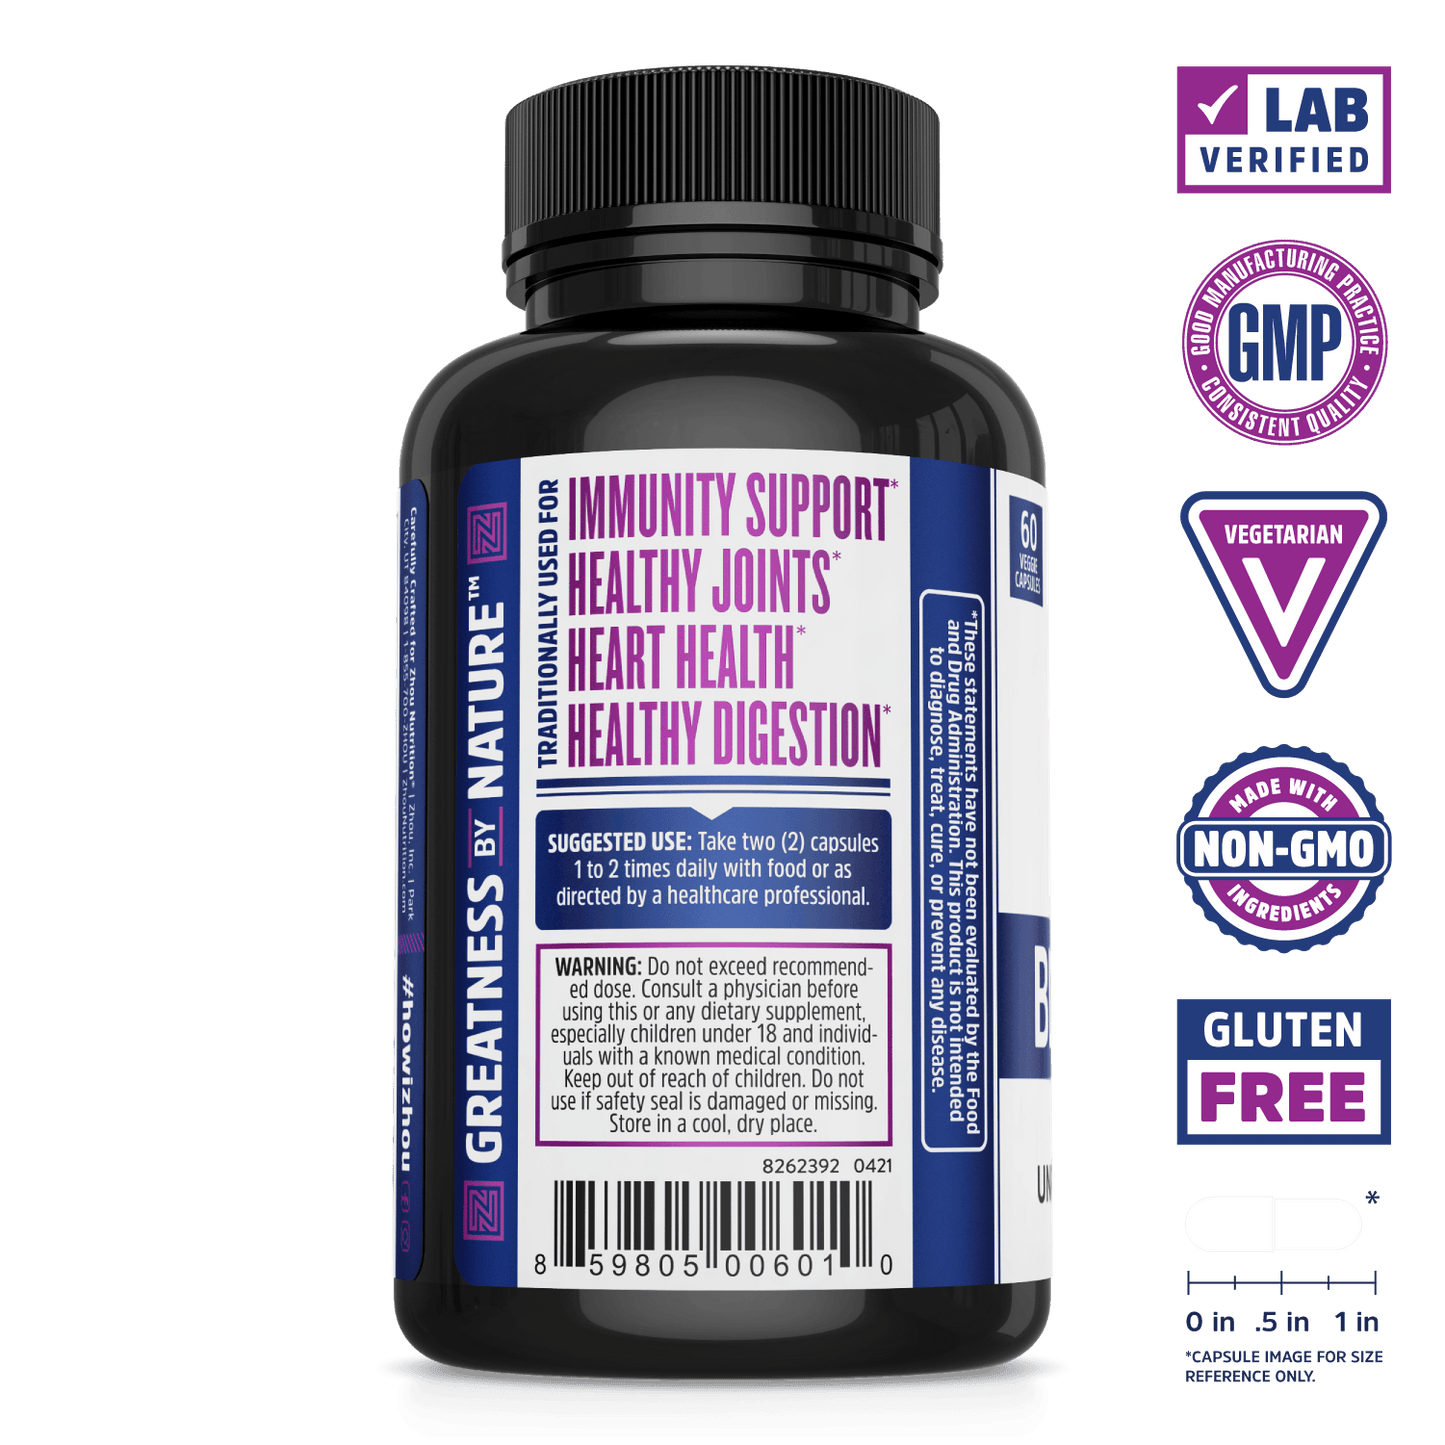 Black Seed Kalonji Oil Liquid Capsules From Zhou Nutrition. Bottle side. Lab verified, good manufacturing practices, vegetarian, made with non-GMO ingredients, gluten free.